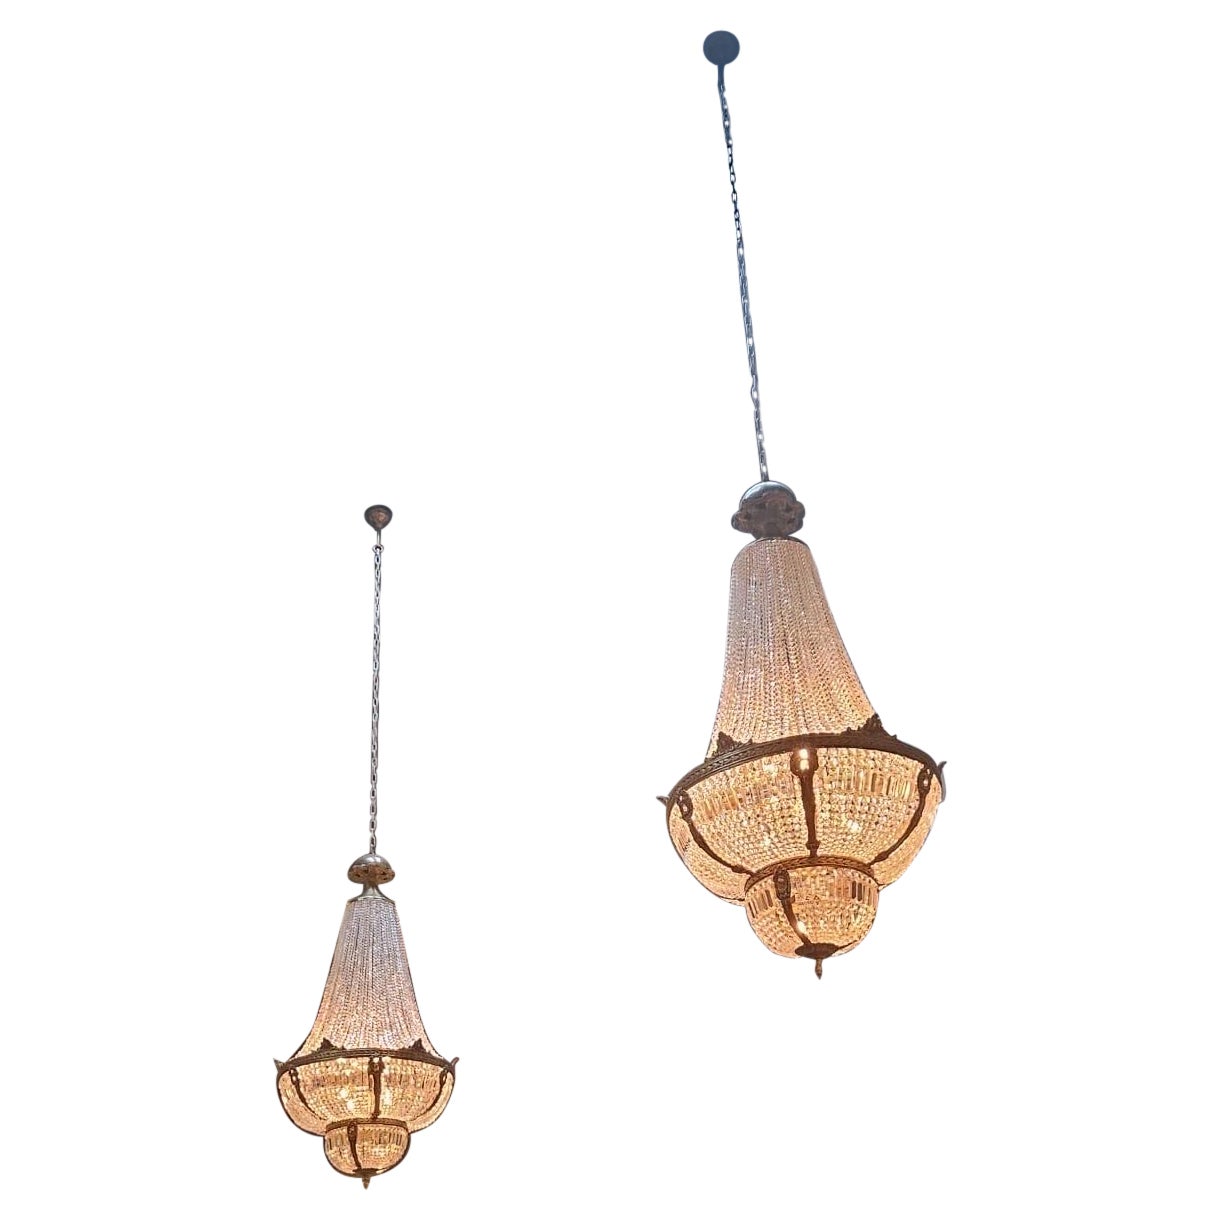 Huge, 5ft tall, French antique empire chandeliers (pair available)  For Sale